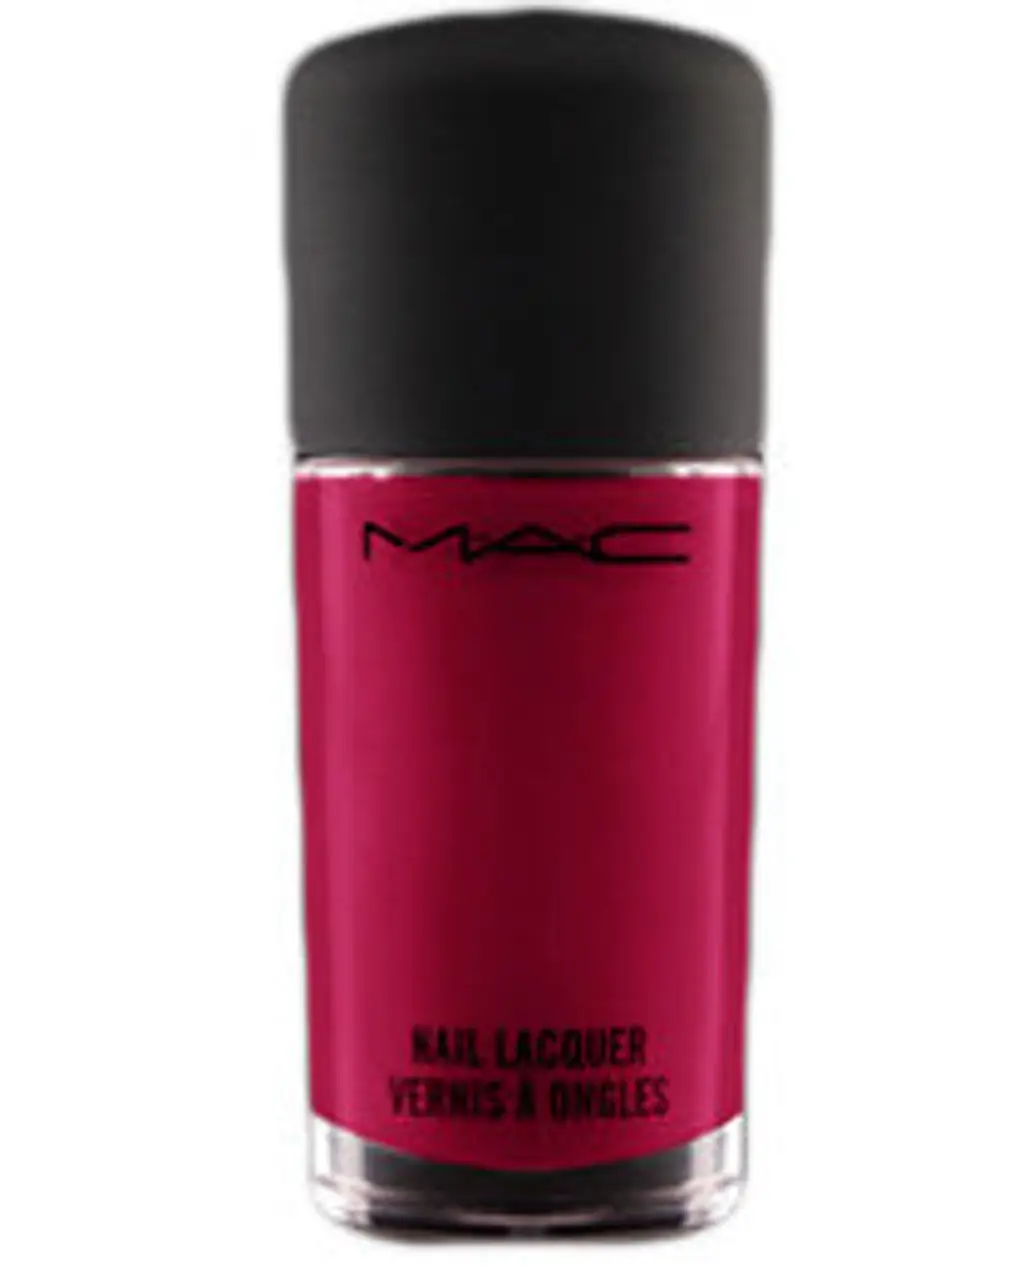 MAC Nail Lacquer “Studded”